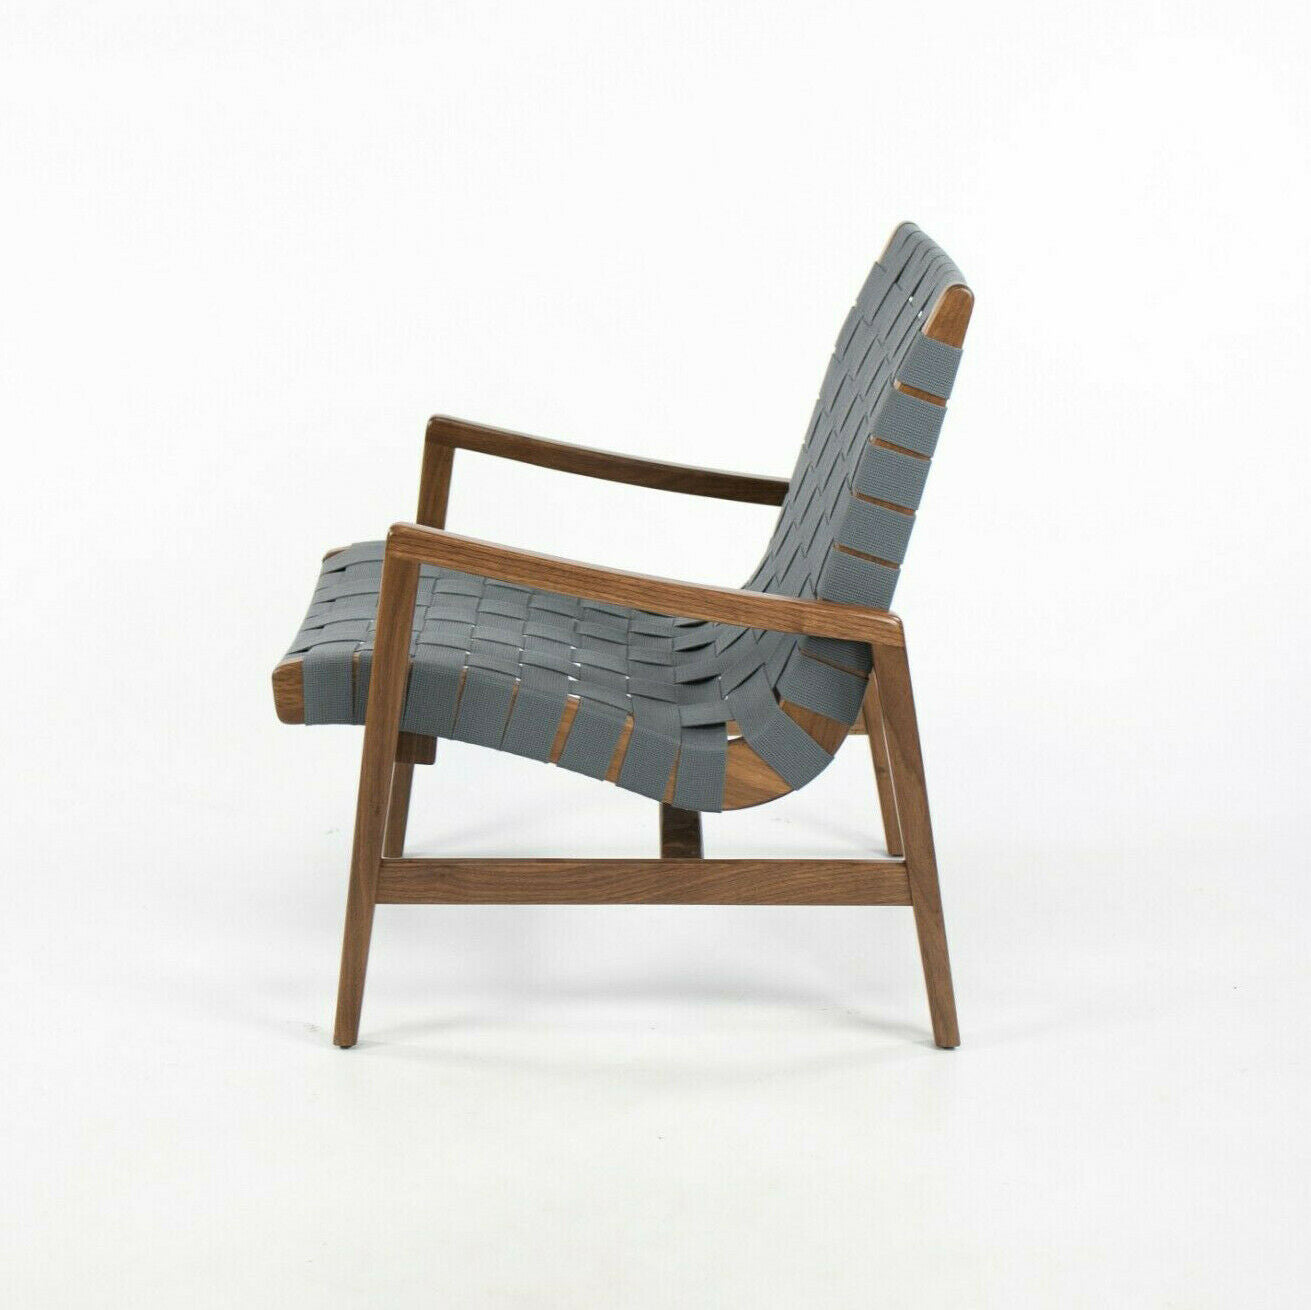 SOLD 2021 Jens Risom for Knoll Lounge Chair with Arms in Light Walnut and Gray Cotton